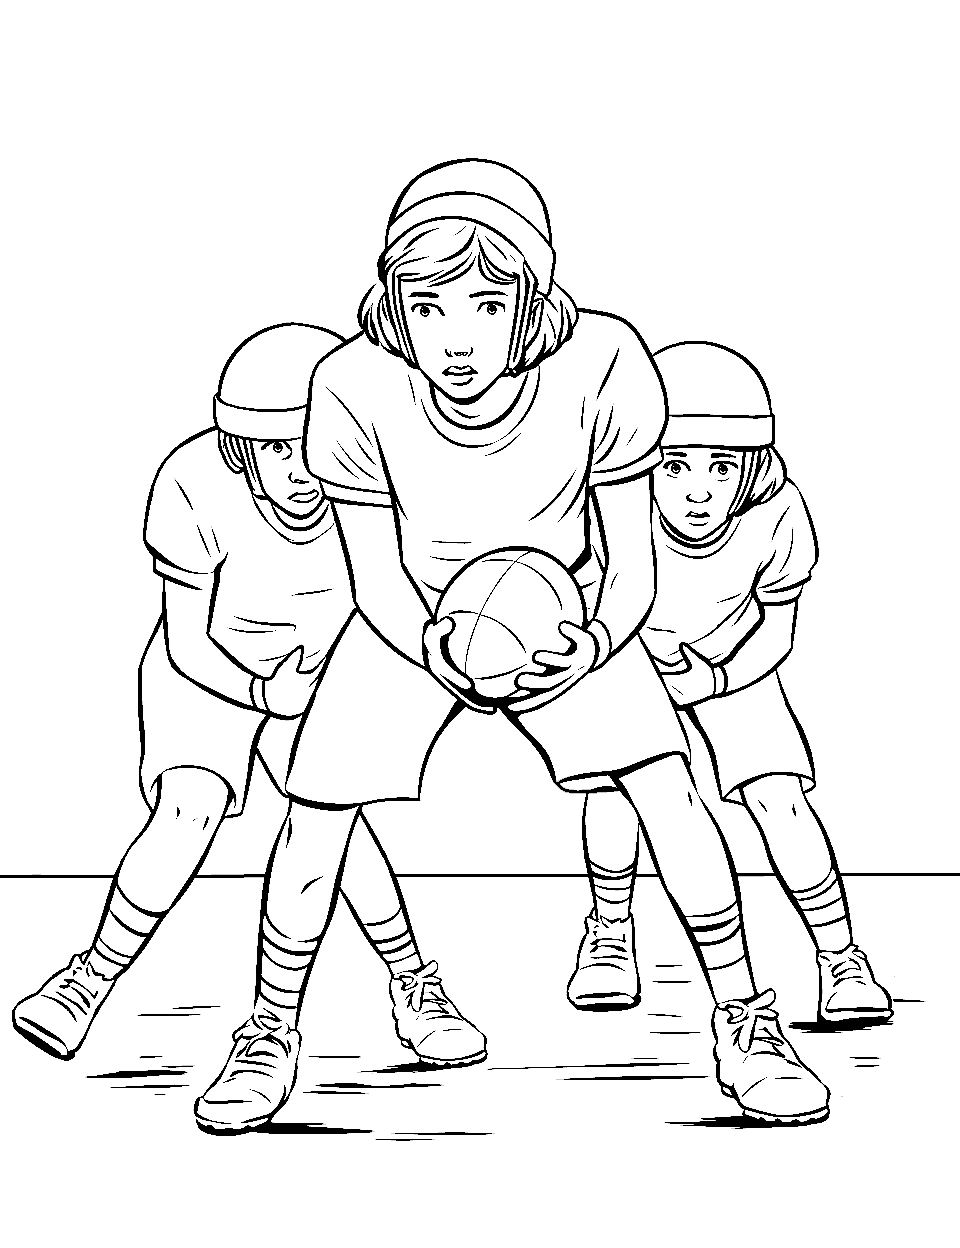 Rugged Blocking Drill Coloring Page - Players engaging in a blocking drill during practice.